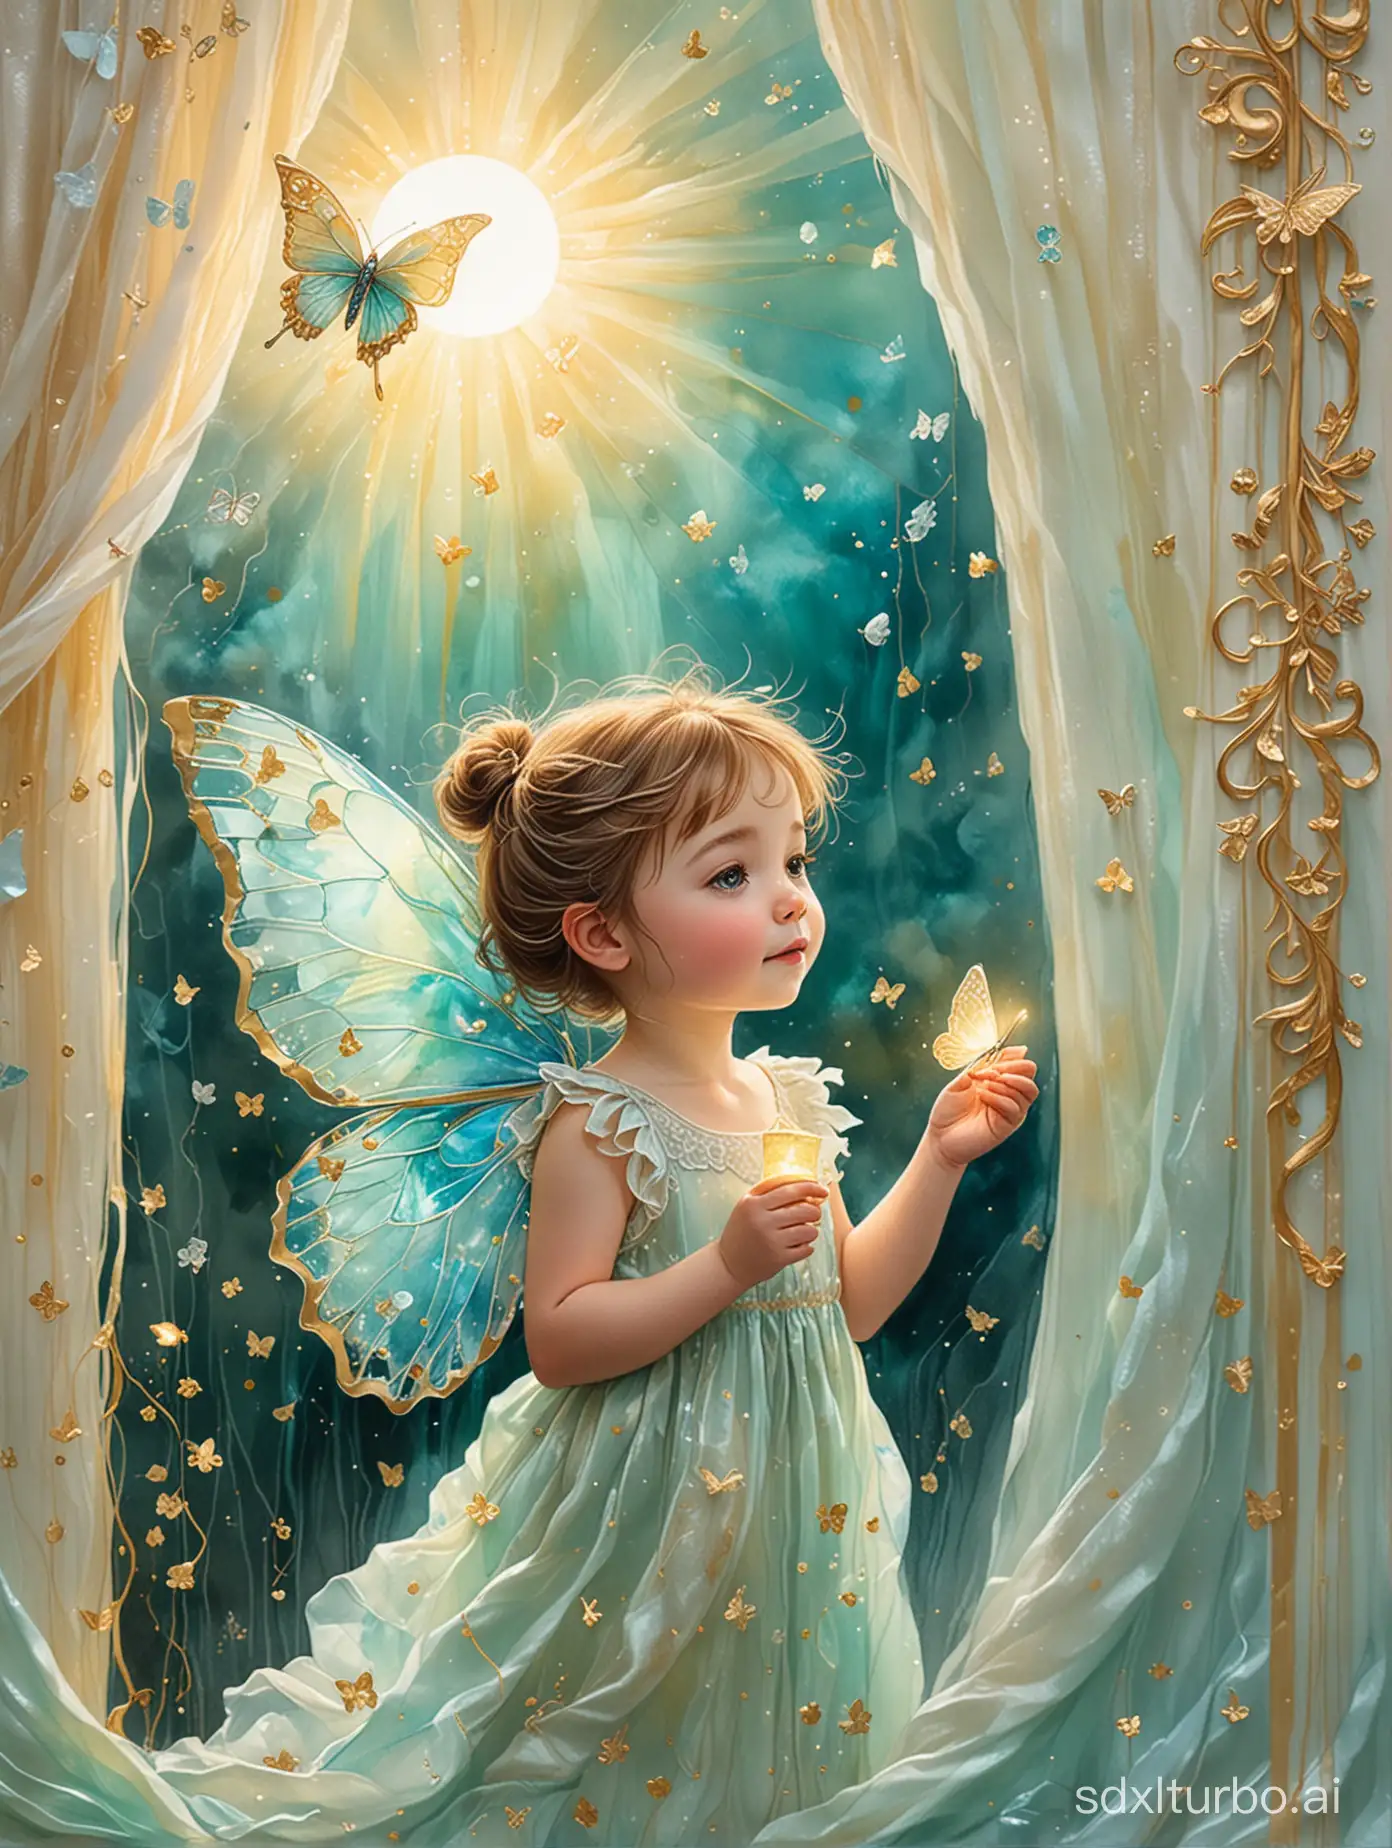 watercolour and alcohol ink artwork enriched with filigree and tactile effects, translucent silk paper painting with marbled technique, a cute little girl with delicate iridescent butterfly wings holding a tiny lantern, sunbeams are softly illuminating the iridescent and translucent wings through the curtain, accents of pale teal with bright gold edging, Disney Pixar style, 32k, delicate soft lightning